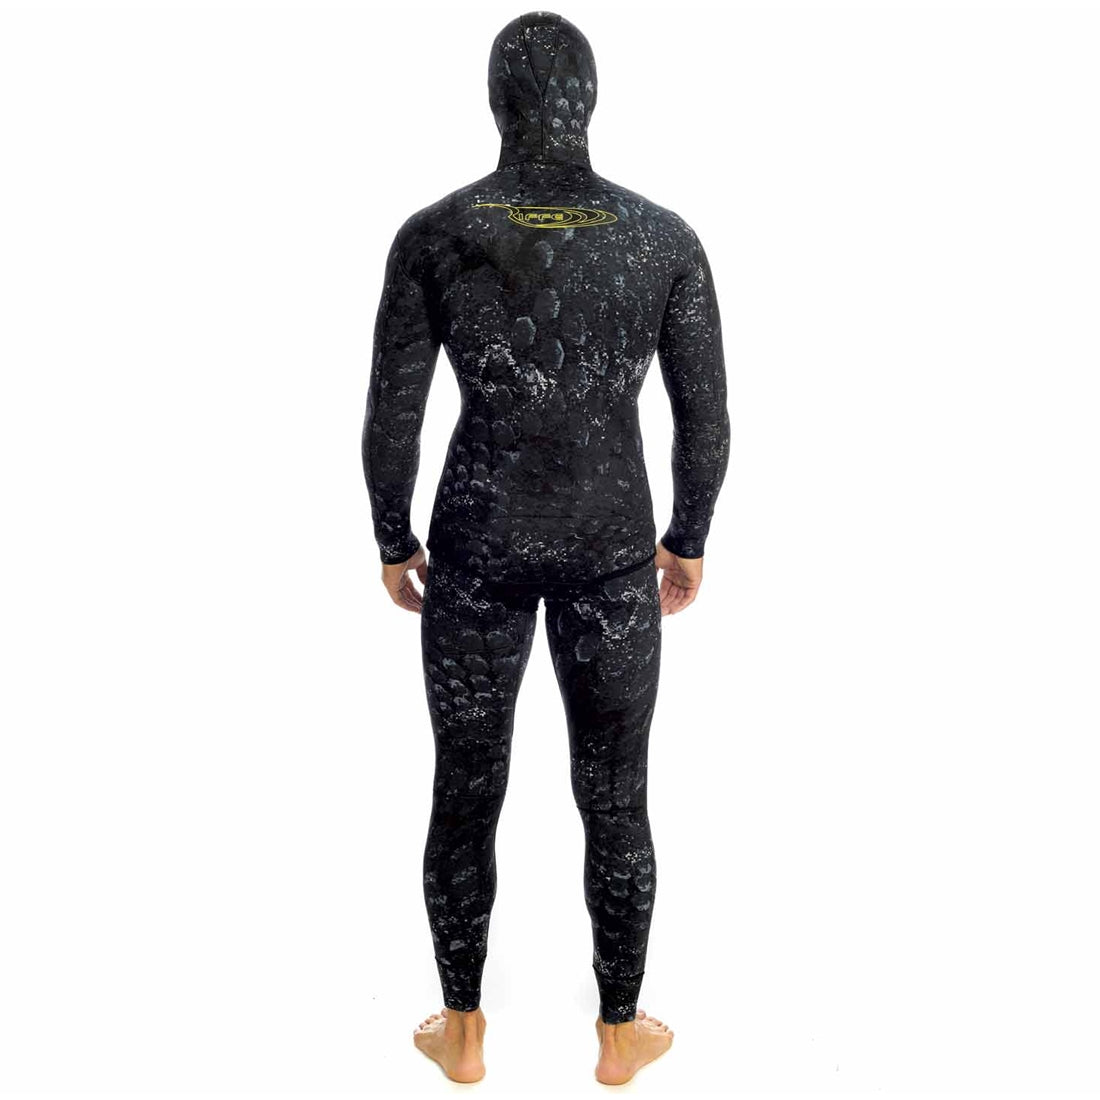 Wetsuit 3.5mm Neoprene, Full Body Diving Suit with Hoodie, Winter Long  Sleeve Men's Wetsuit for Snorkeling Surfing Suits Camouflage1-XXL